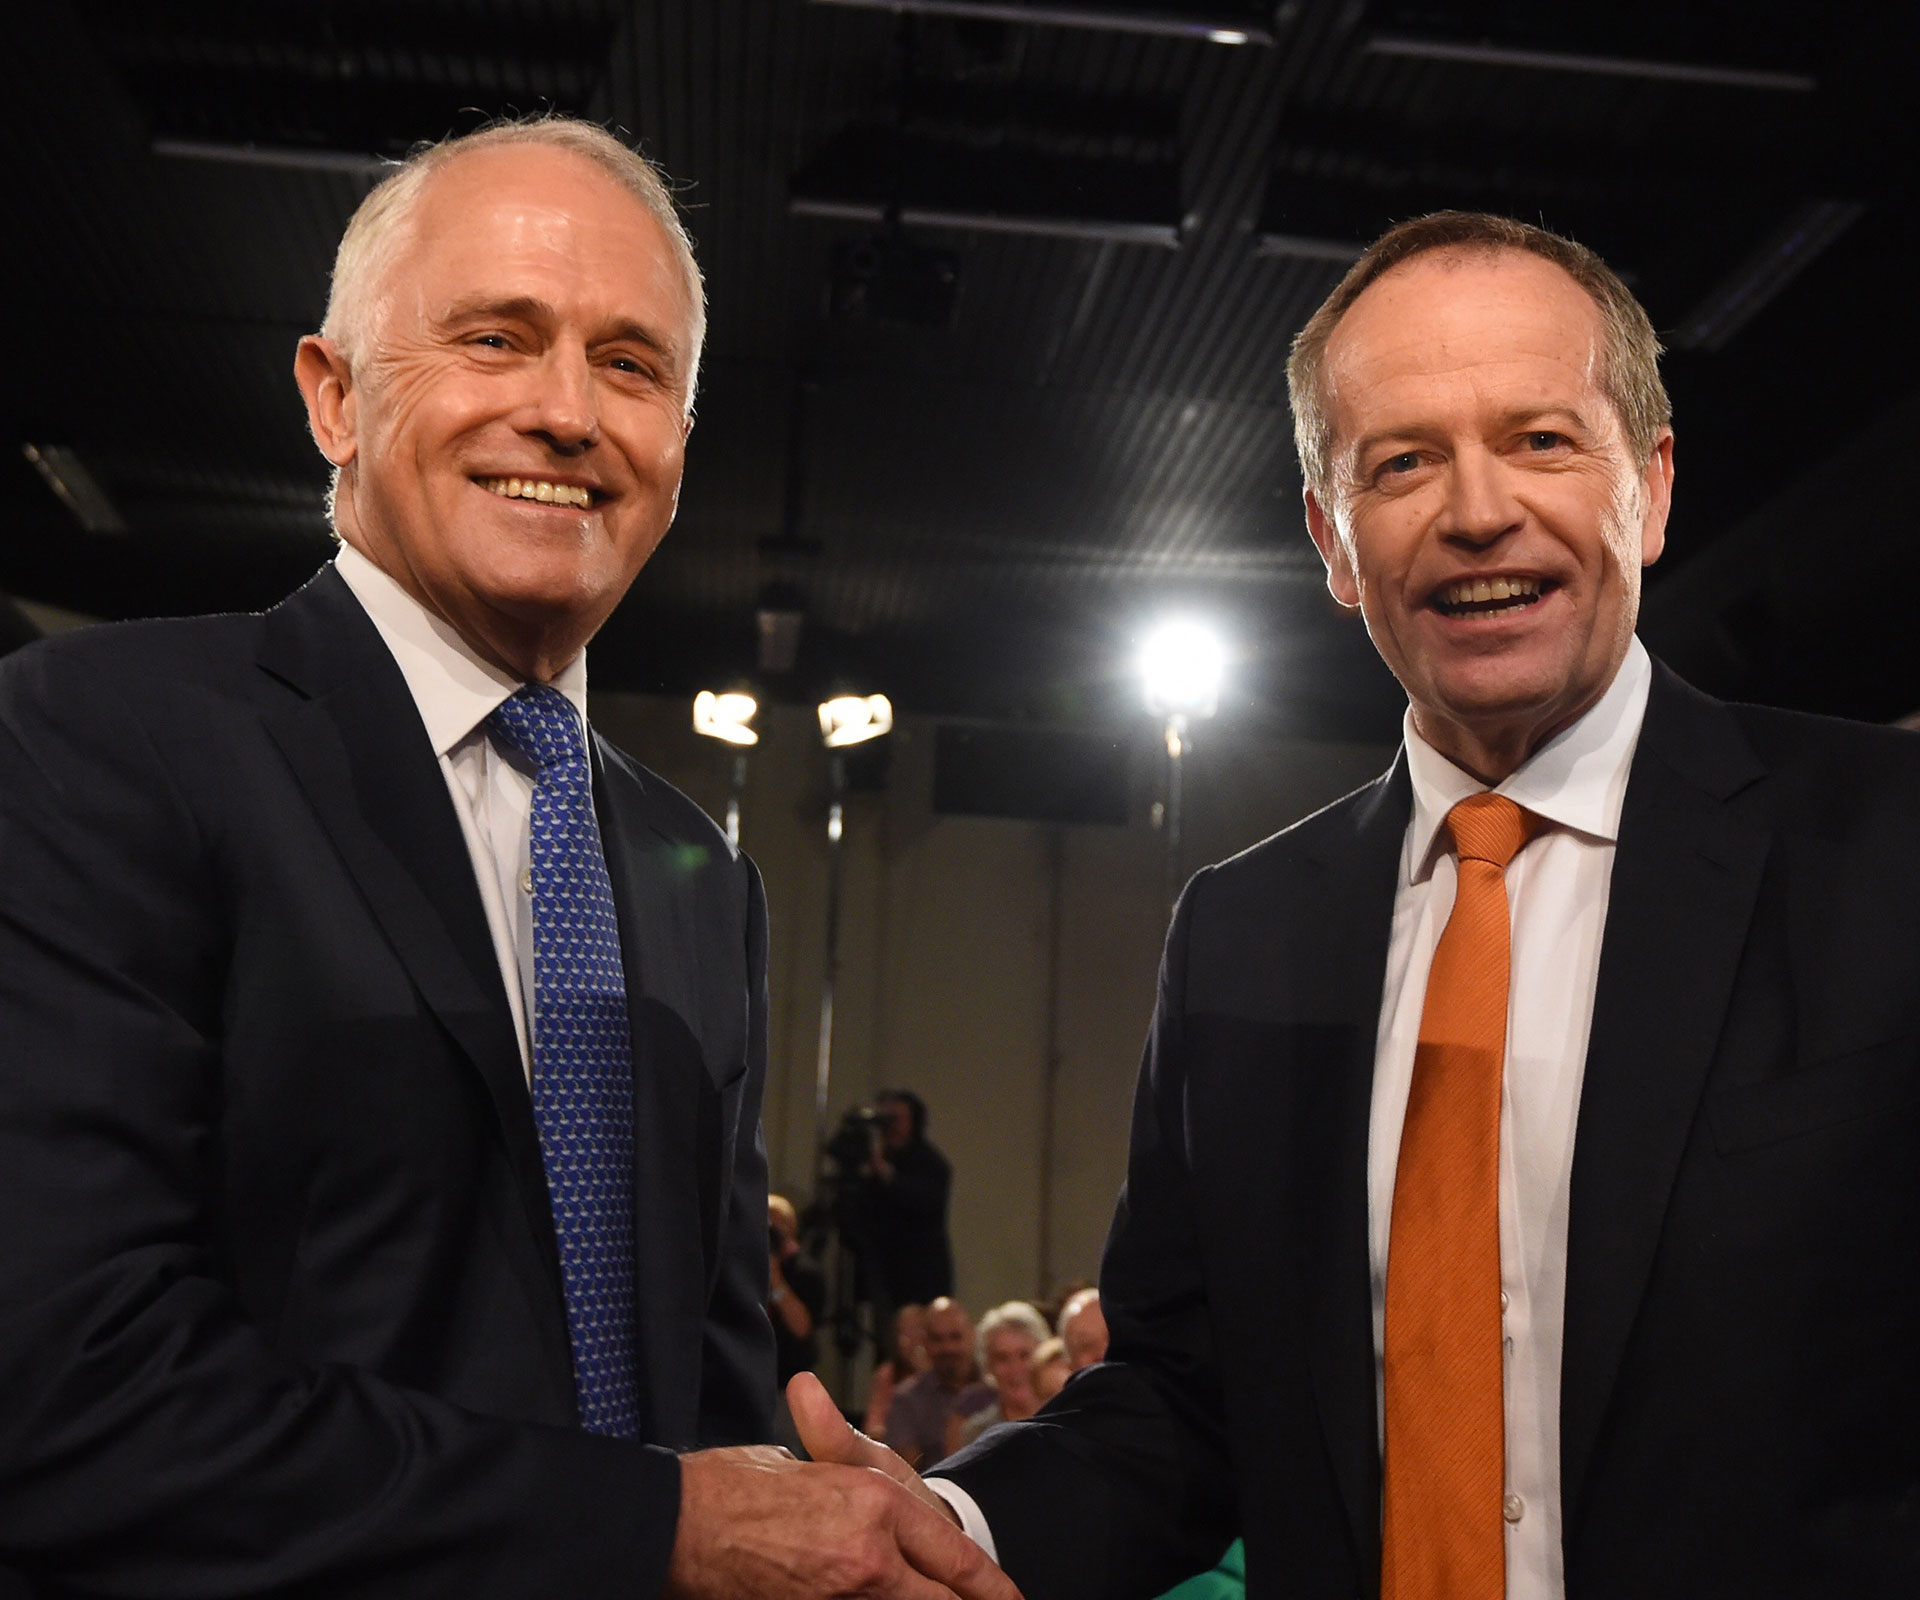 Australian election still too close to call